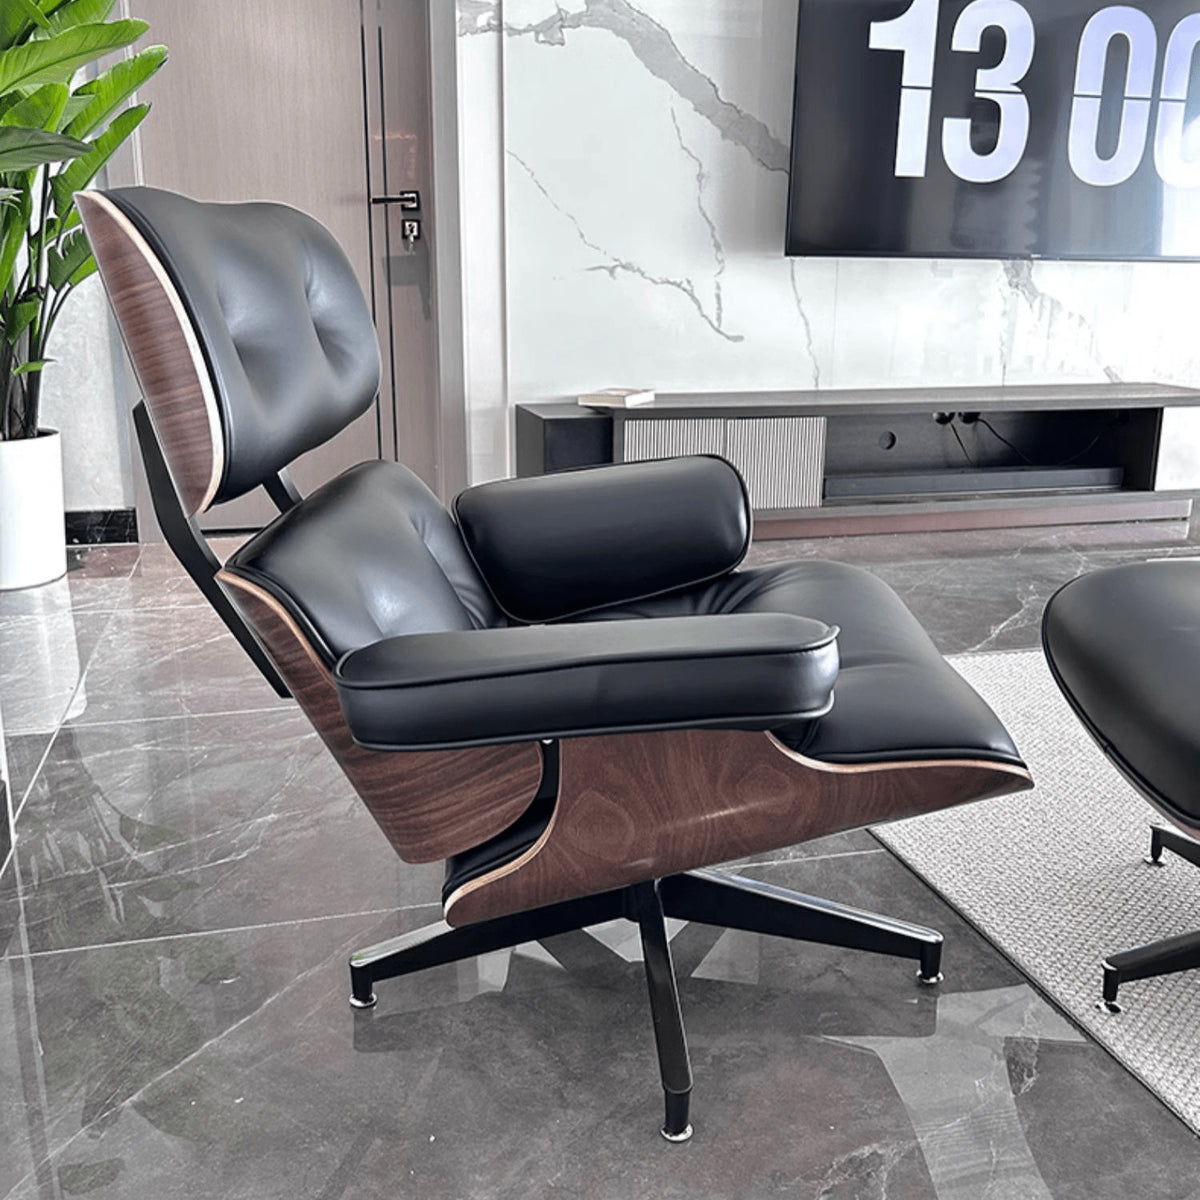 Luxurious Black PU Leather Office Chair – Ergonomic and Stylish Seating yw-203